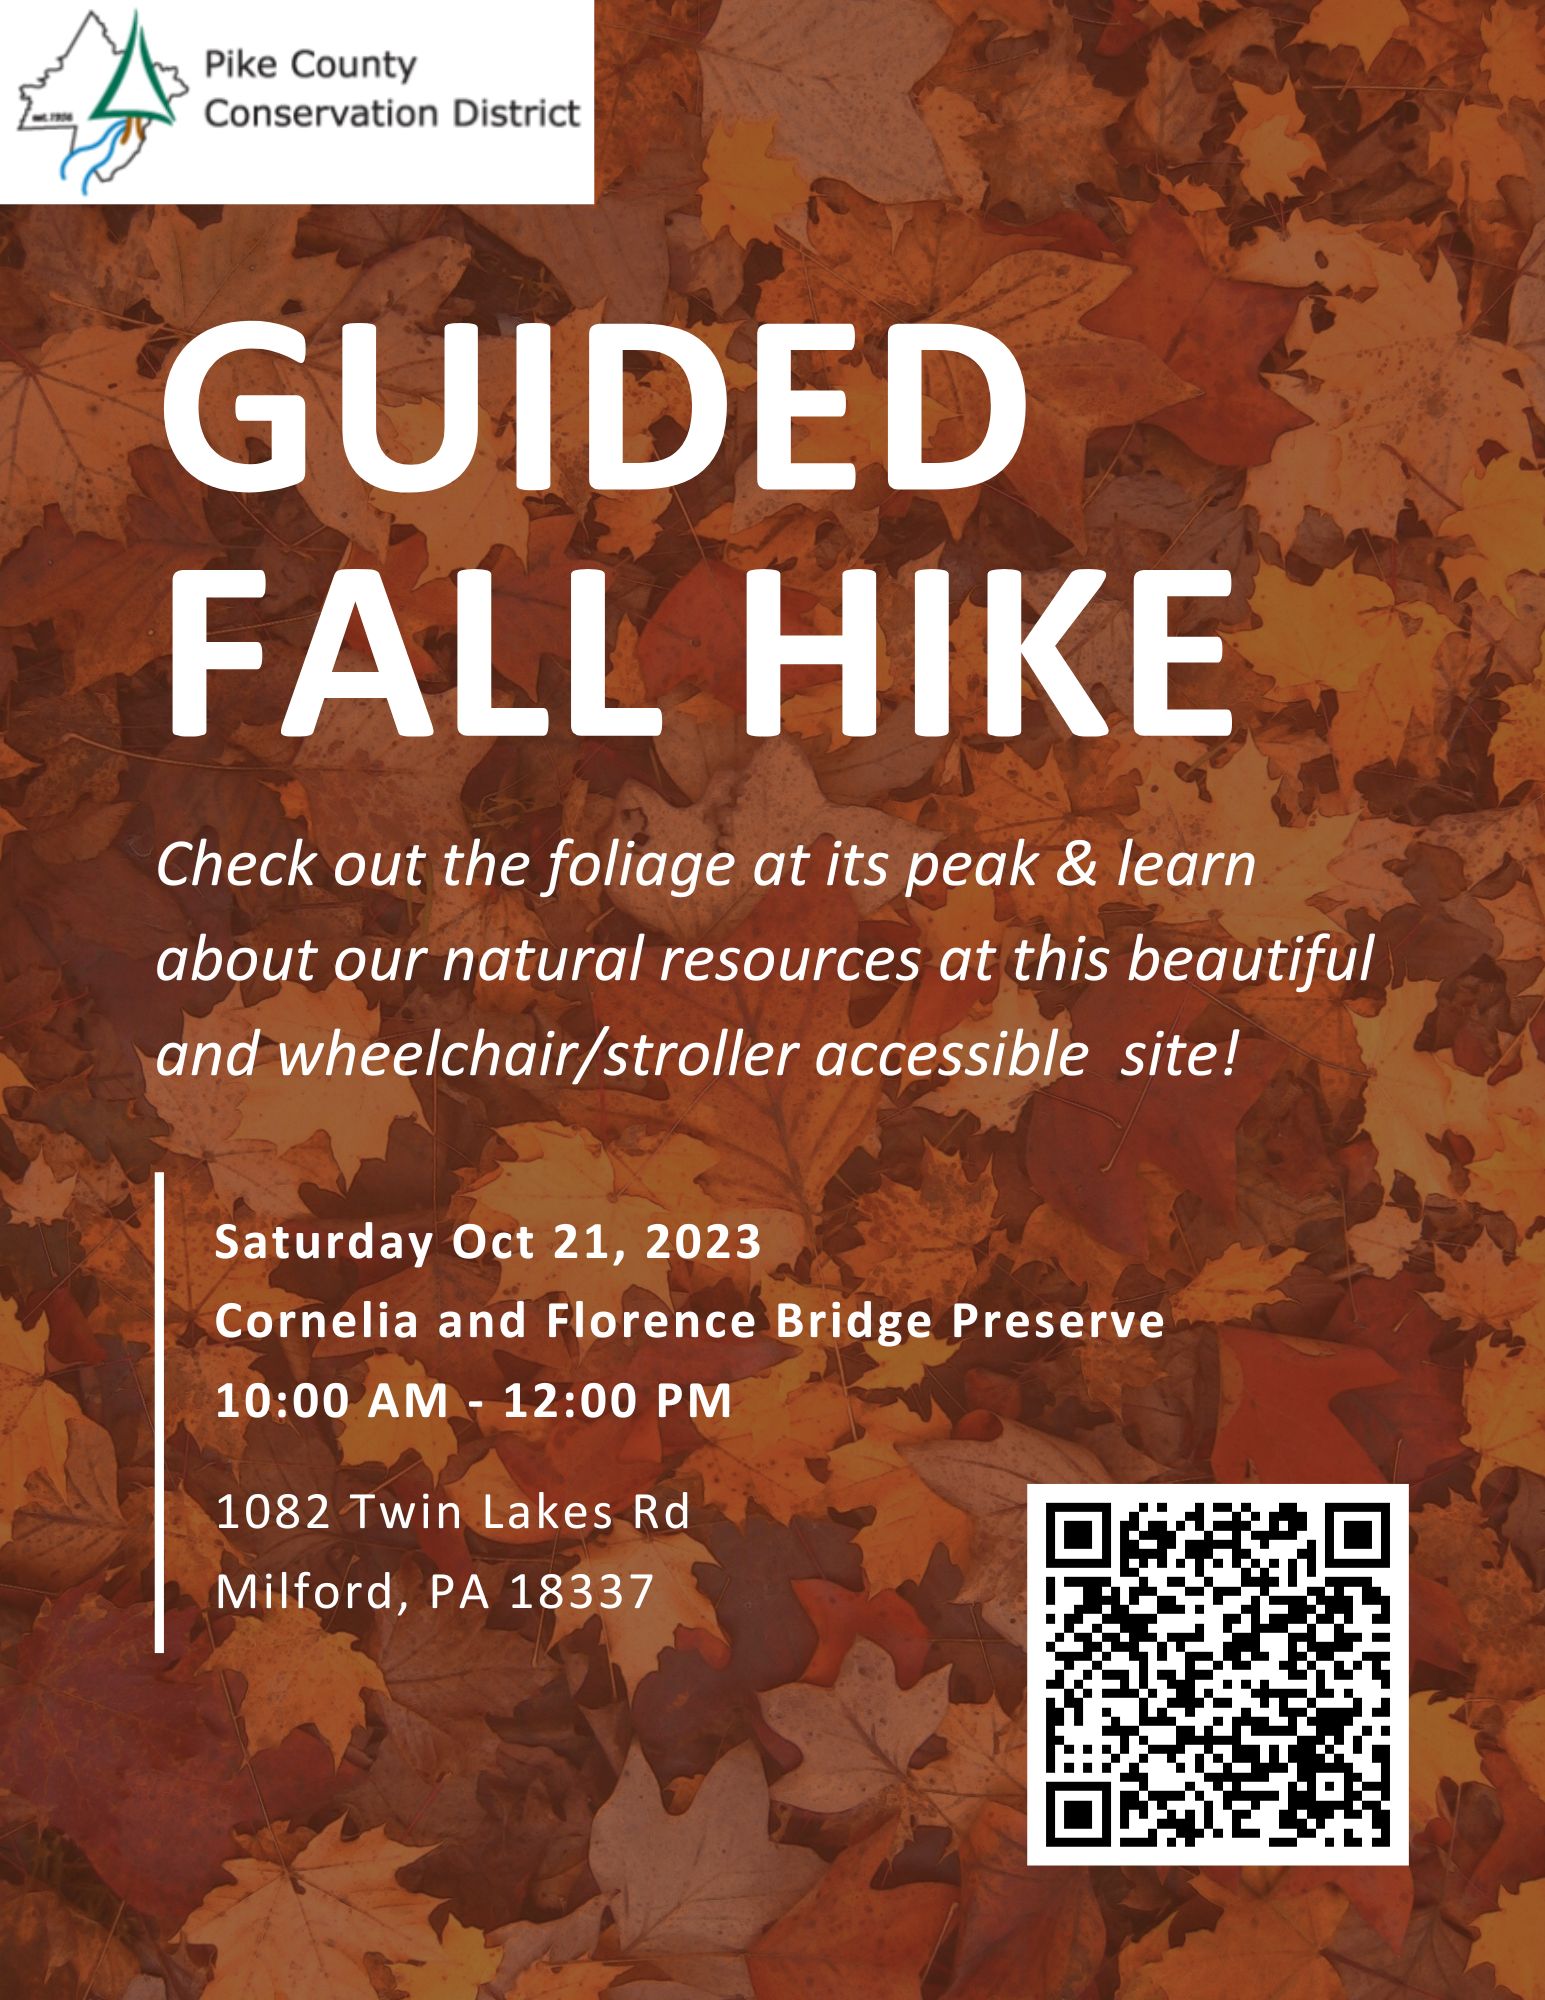 A flyer with a photo of fallen leaves and the text "Pike County Conservation District, Guided Fall Hike, Check out the foliage at its peak and learn about our natural resources at this beautiful and wheelchair/stroller accessible site! Saturday October 21, 2023, Cornelia and Florence Bridge Preserve, 10am-12pm, 1082 Twin Lakes Road, Milford, PA, 18337